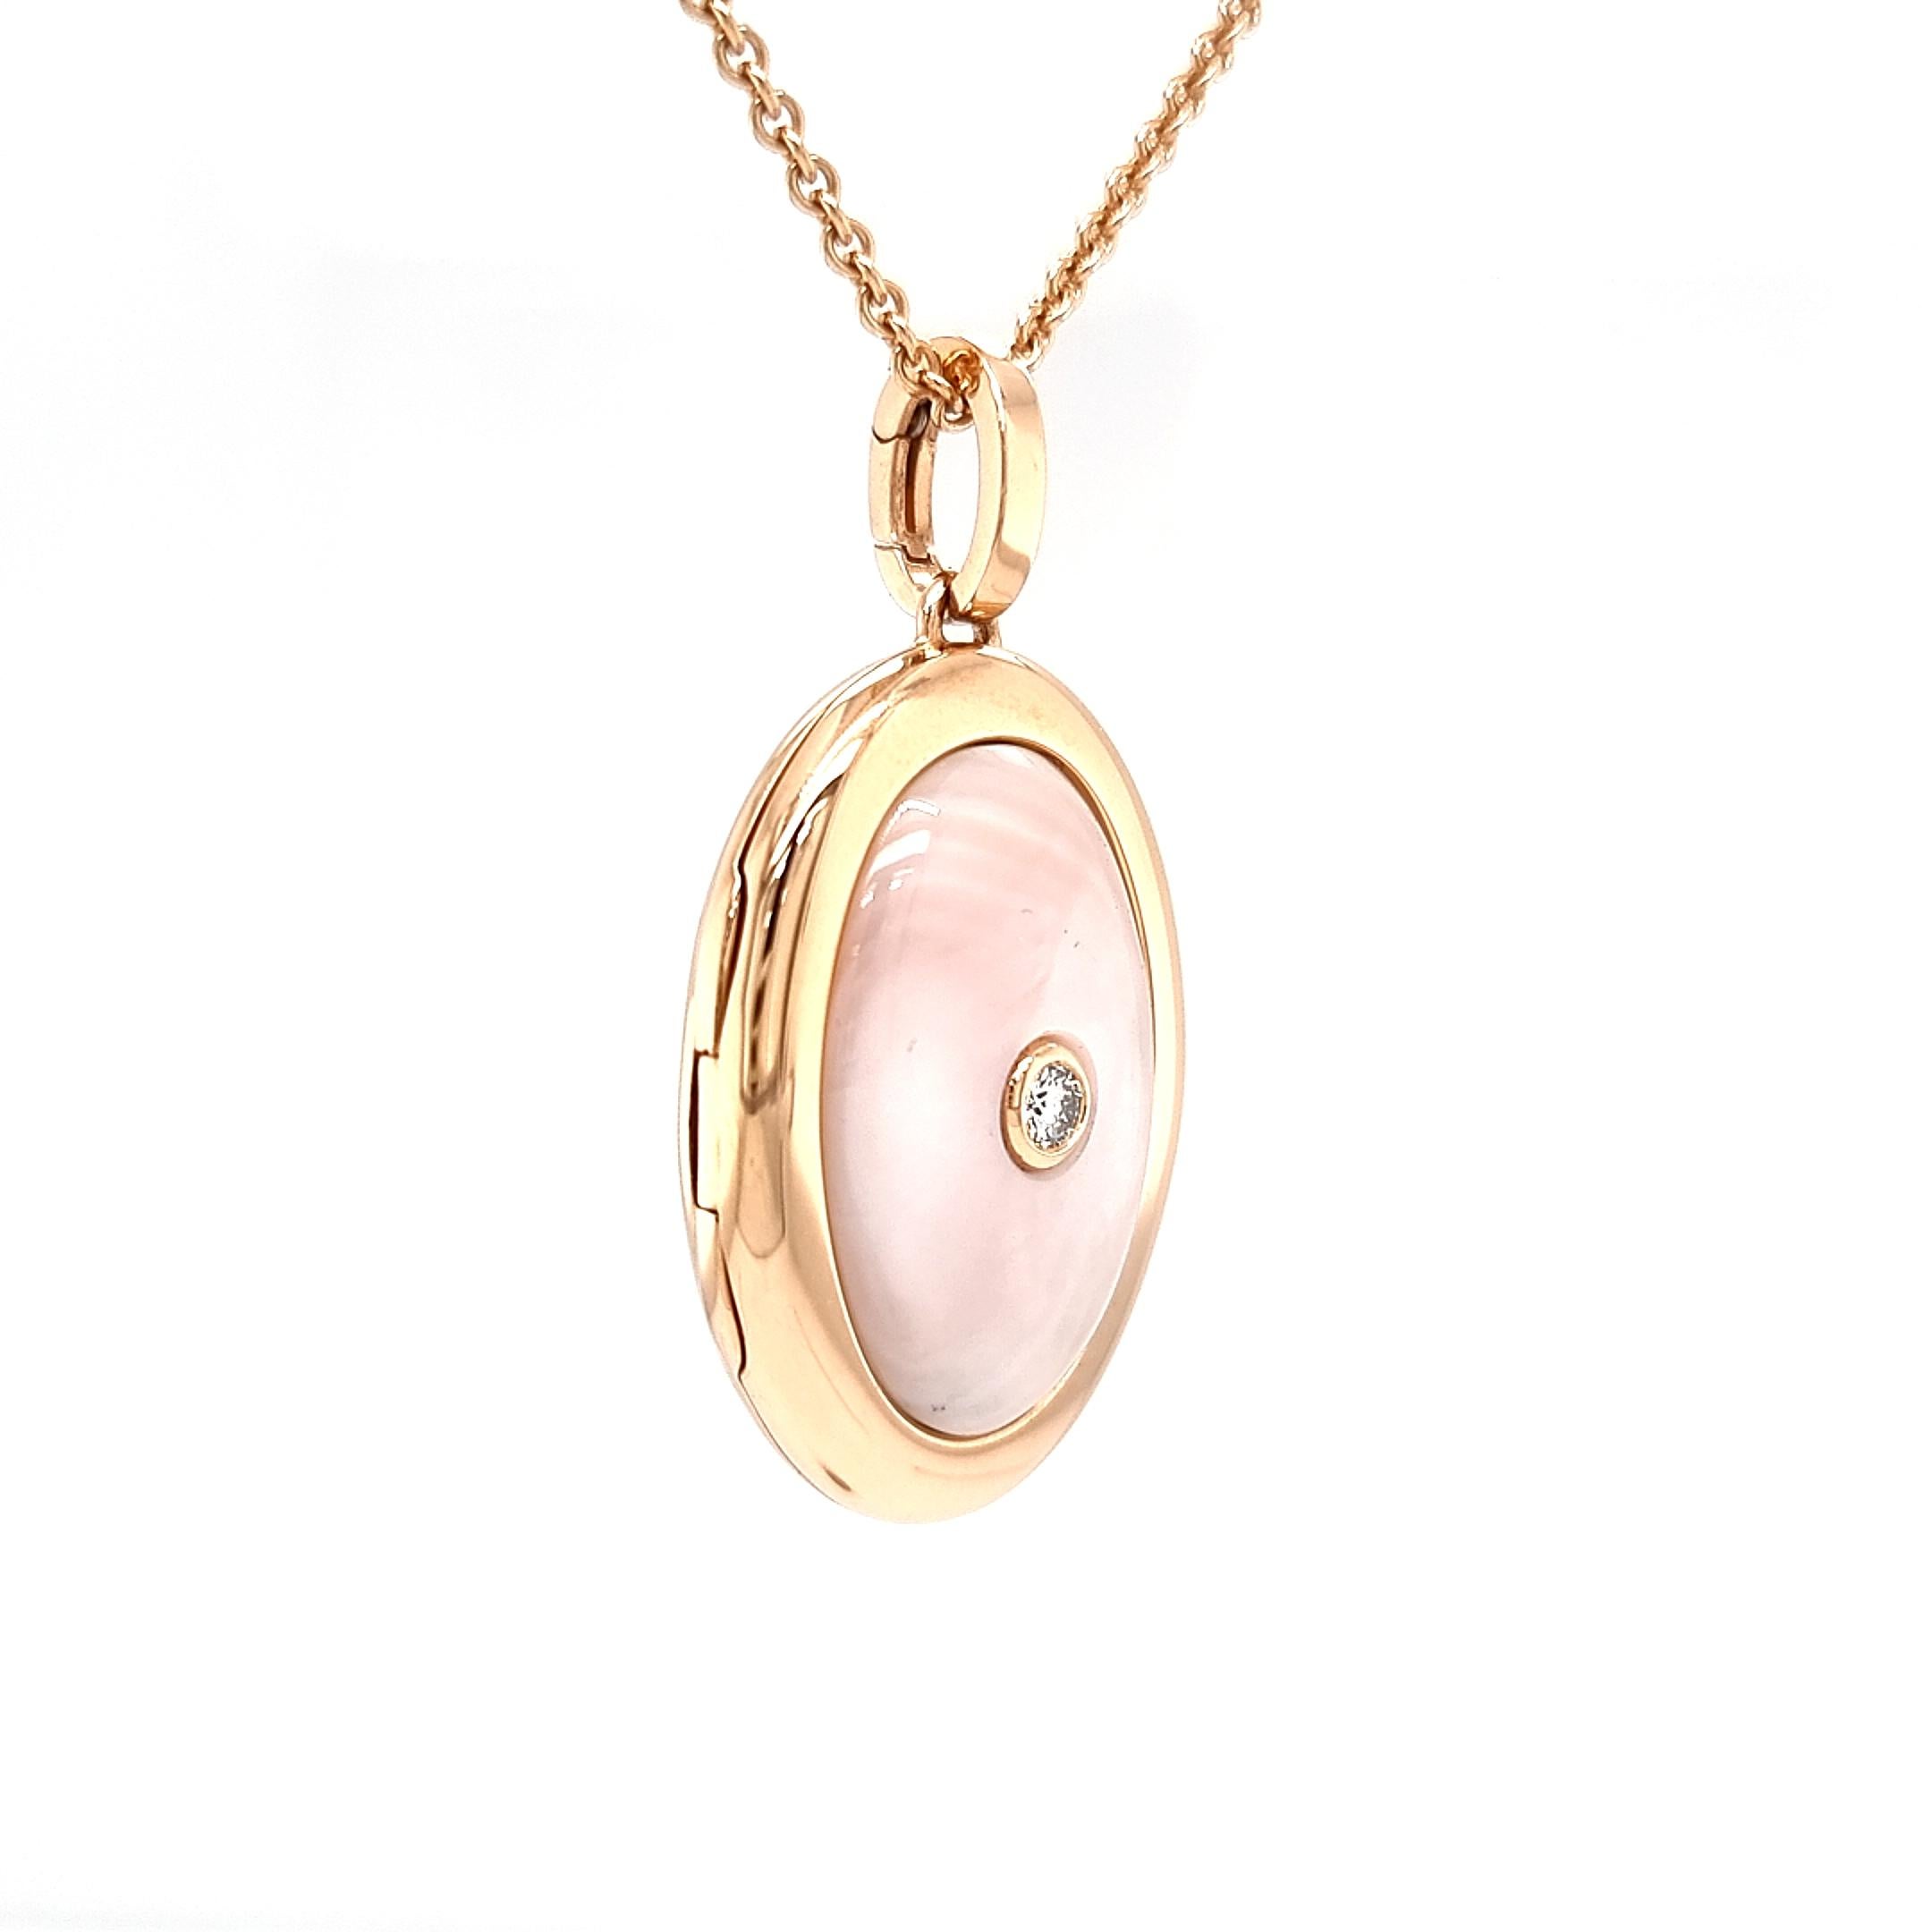 Brilliant Cut Oval Locket Pendant Necklace - 18k Rose Gold - 1 Diamond 0.10 ct H VS Pink Pearl For Sale